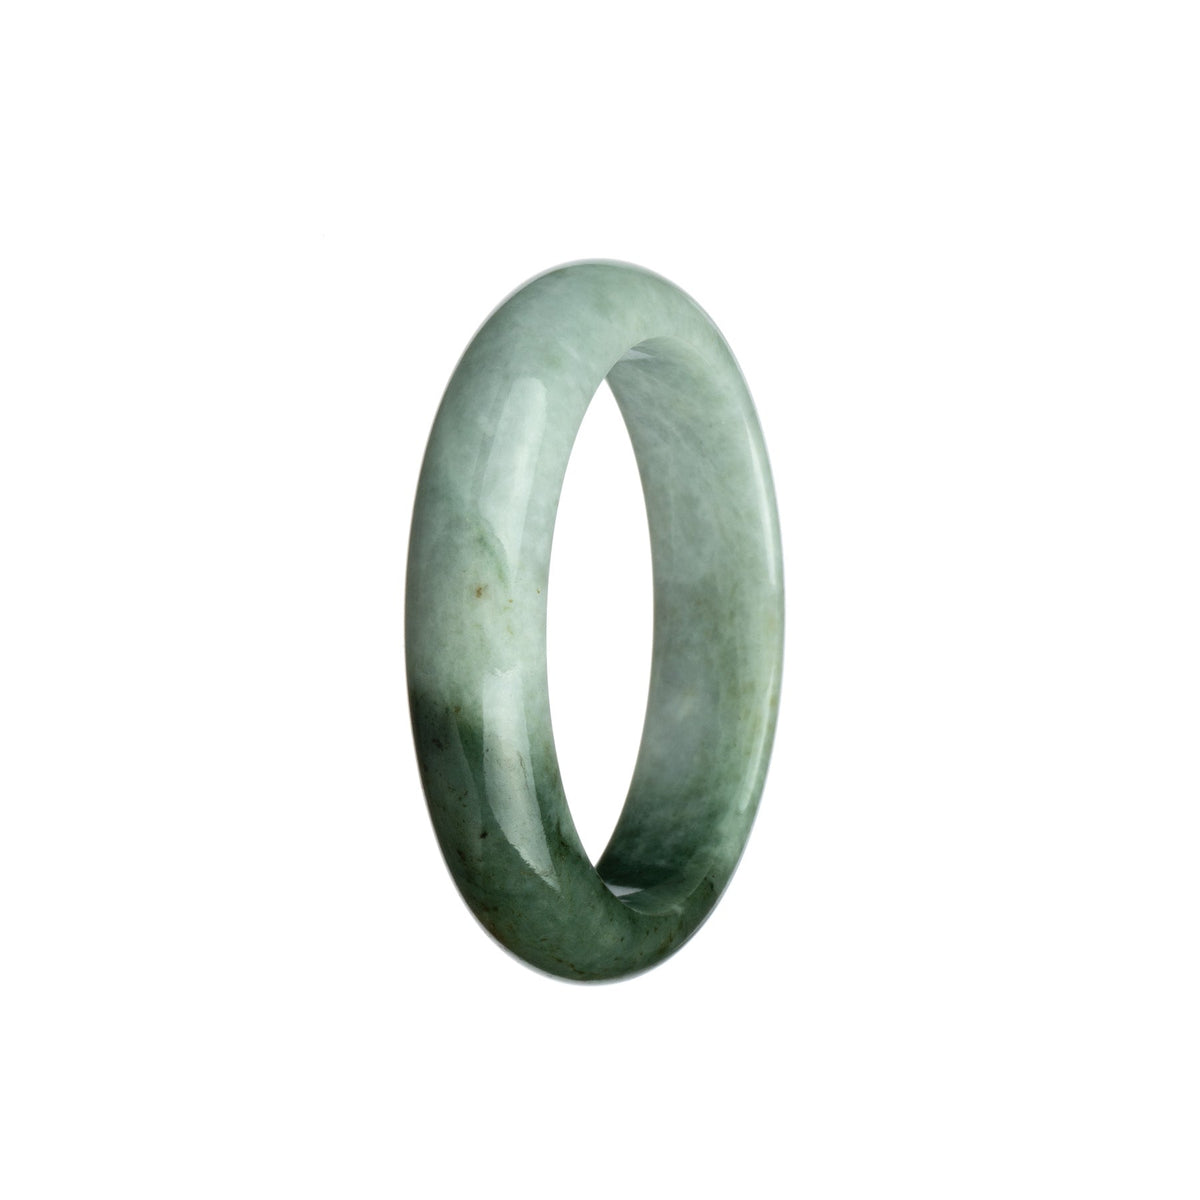 A close-up image of a pale green and olive green Burmese Jade bracelet. The bracelet is in the shape of a 52mm half moon and is described as an authentic Grade A piece. The brand name "MAYS" is also mentioned.